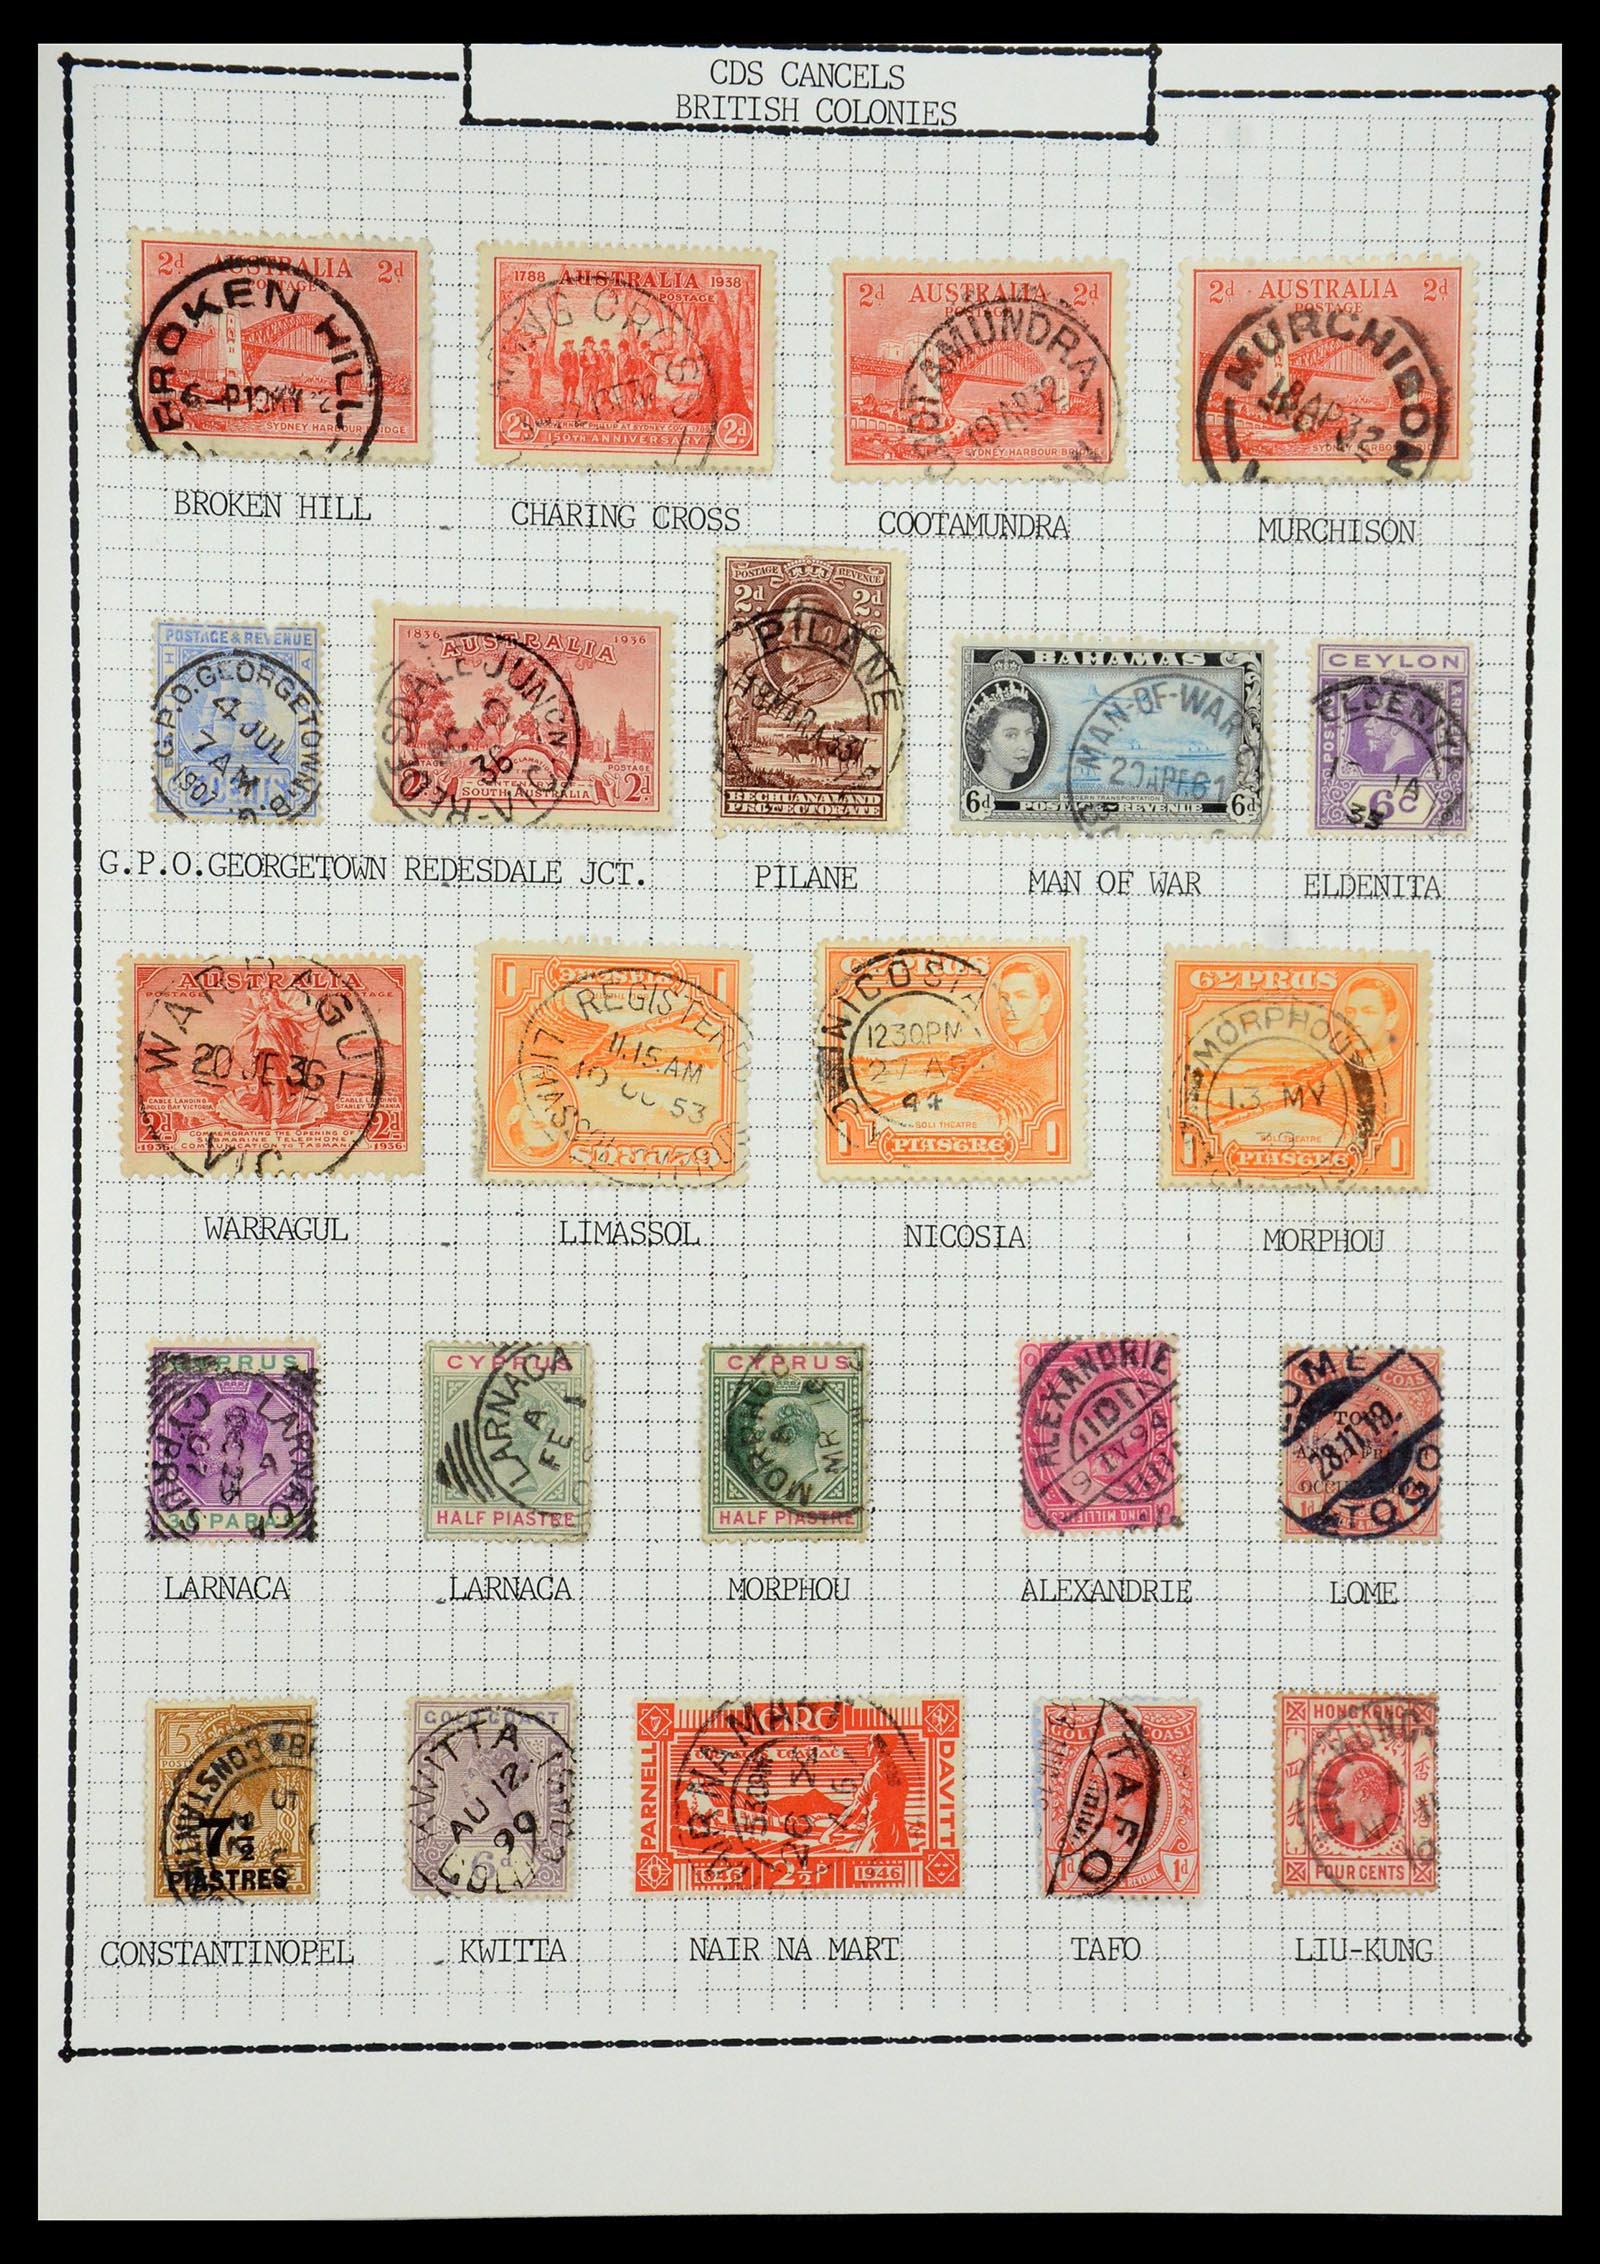 35507 035 - Stamp Collection 35507 Australian States cancels 1859-1899.